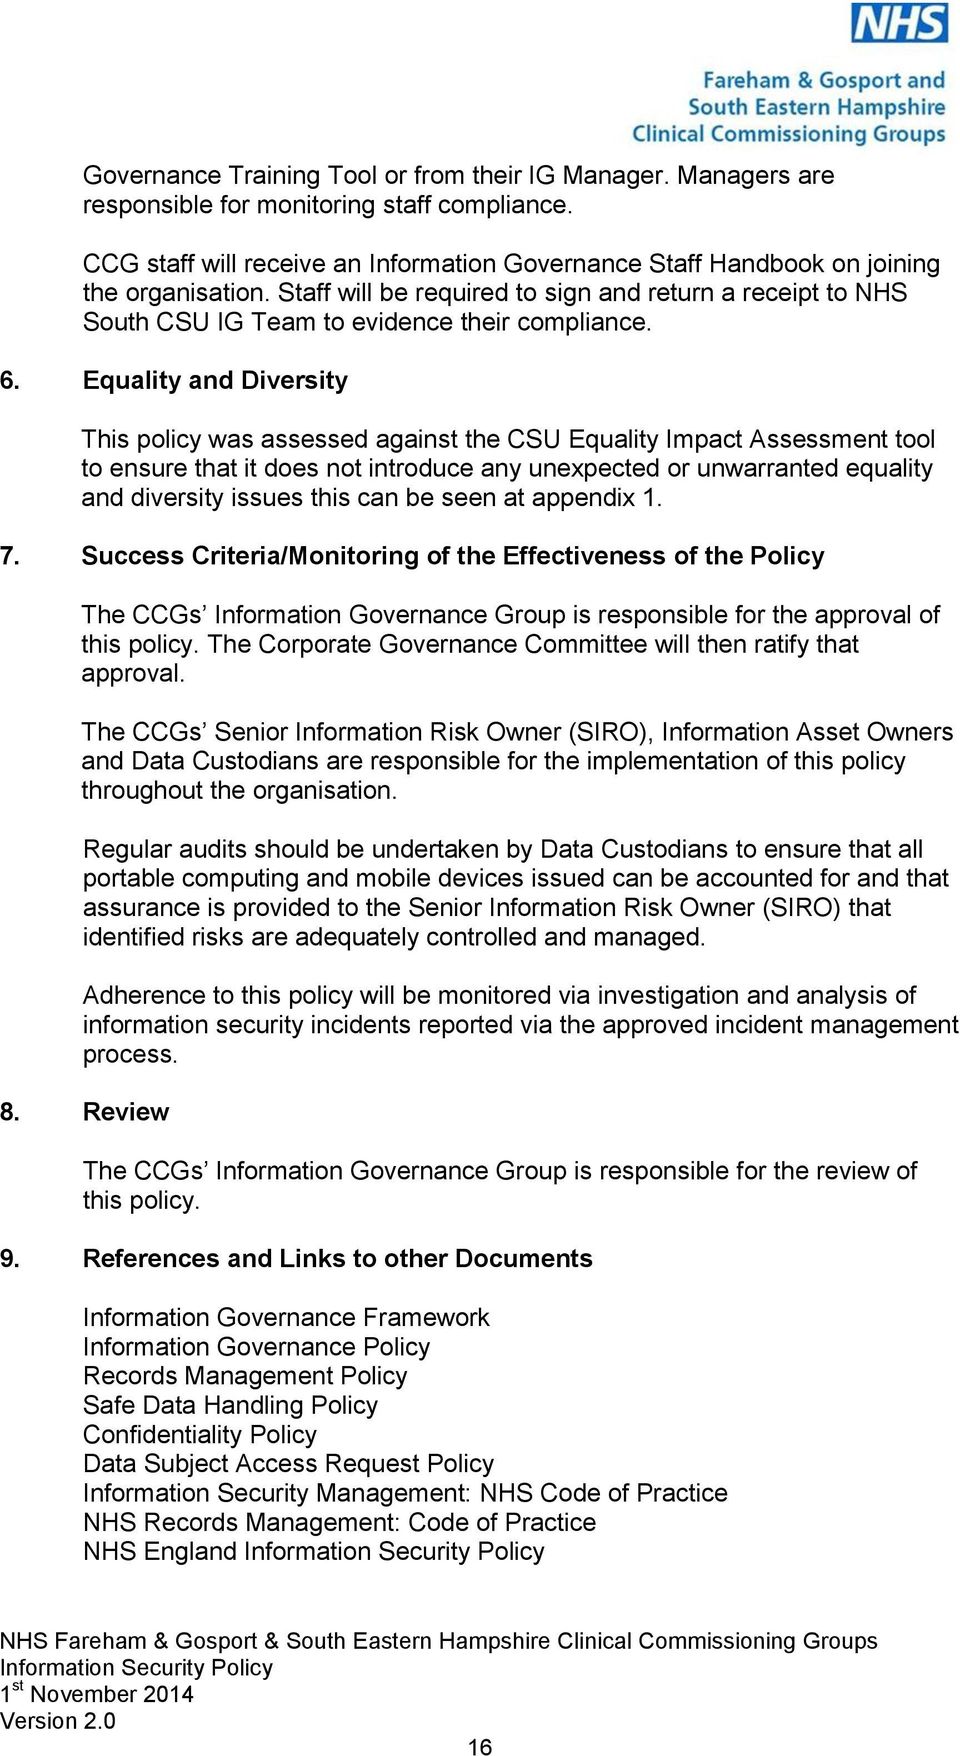 6. Equality and Diversity This policy was assessed against the CSU Equality Impact Assessment tool to ensure that it does not introduce any unexpected or unwarranted equality and diversity issues